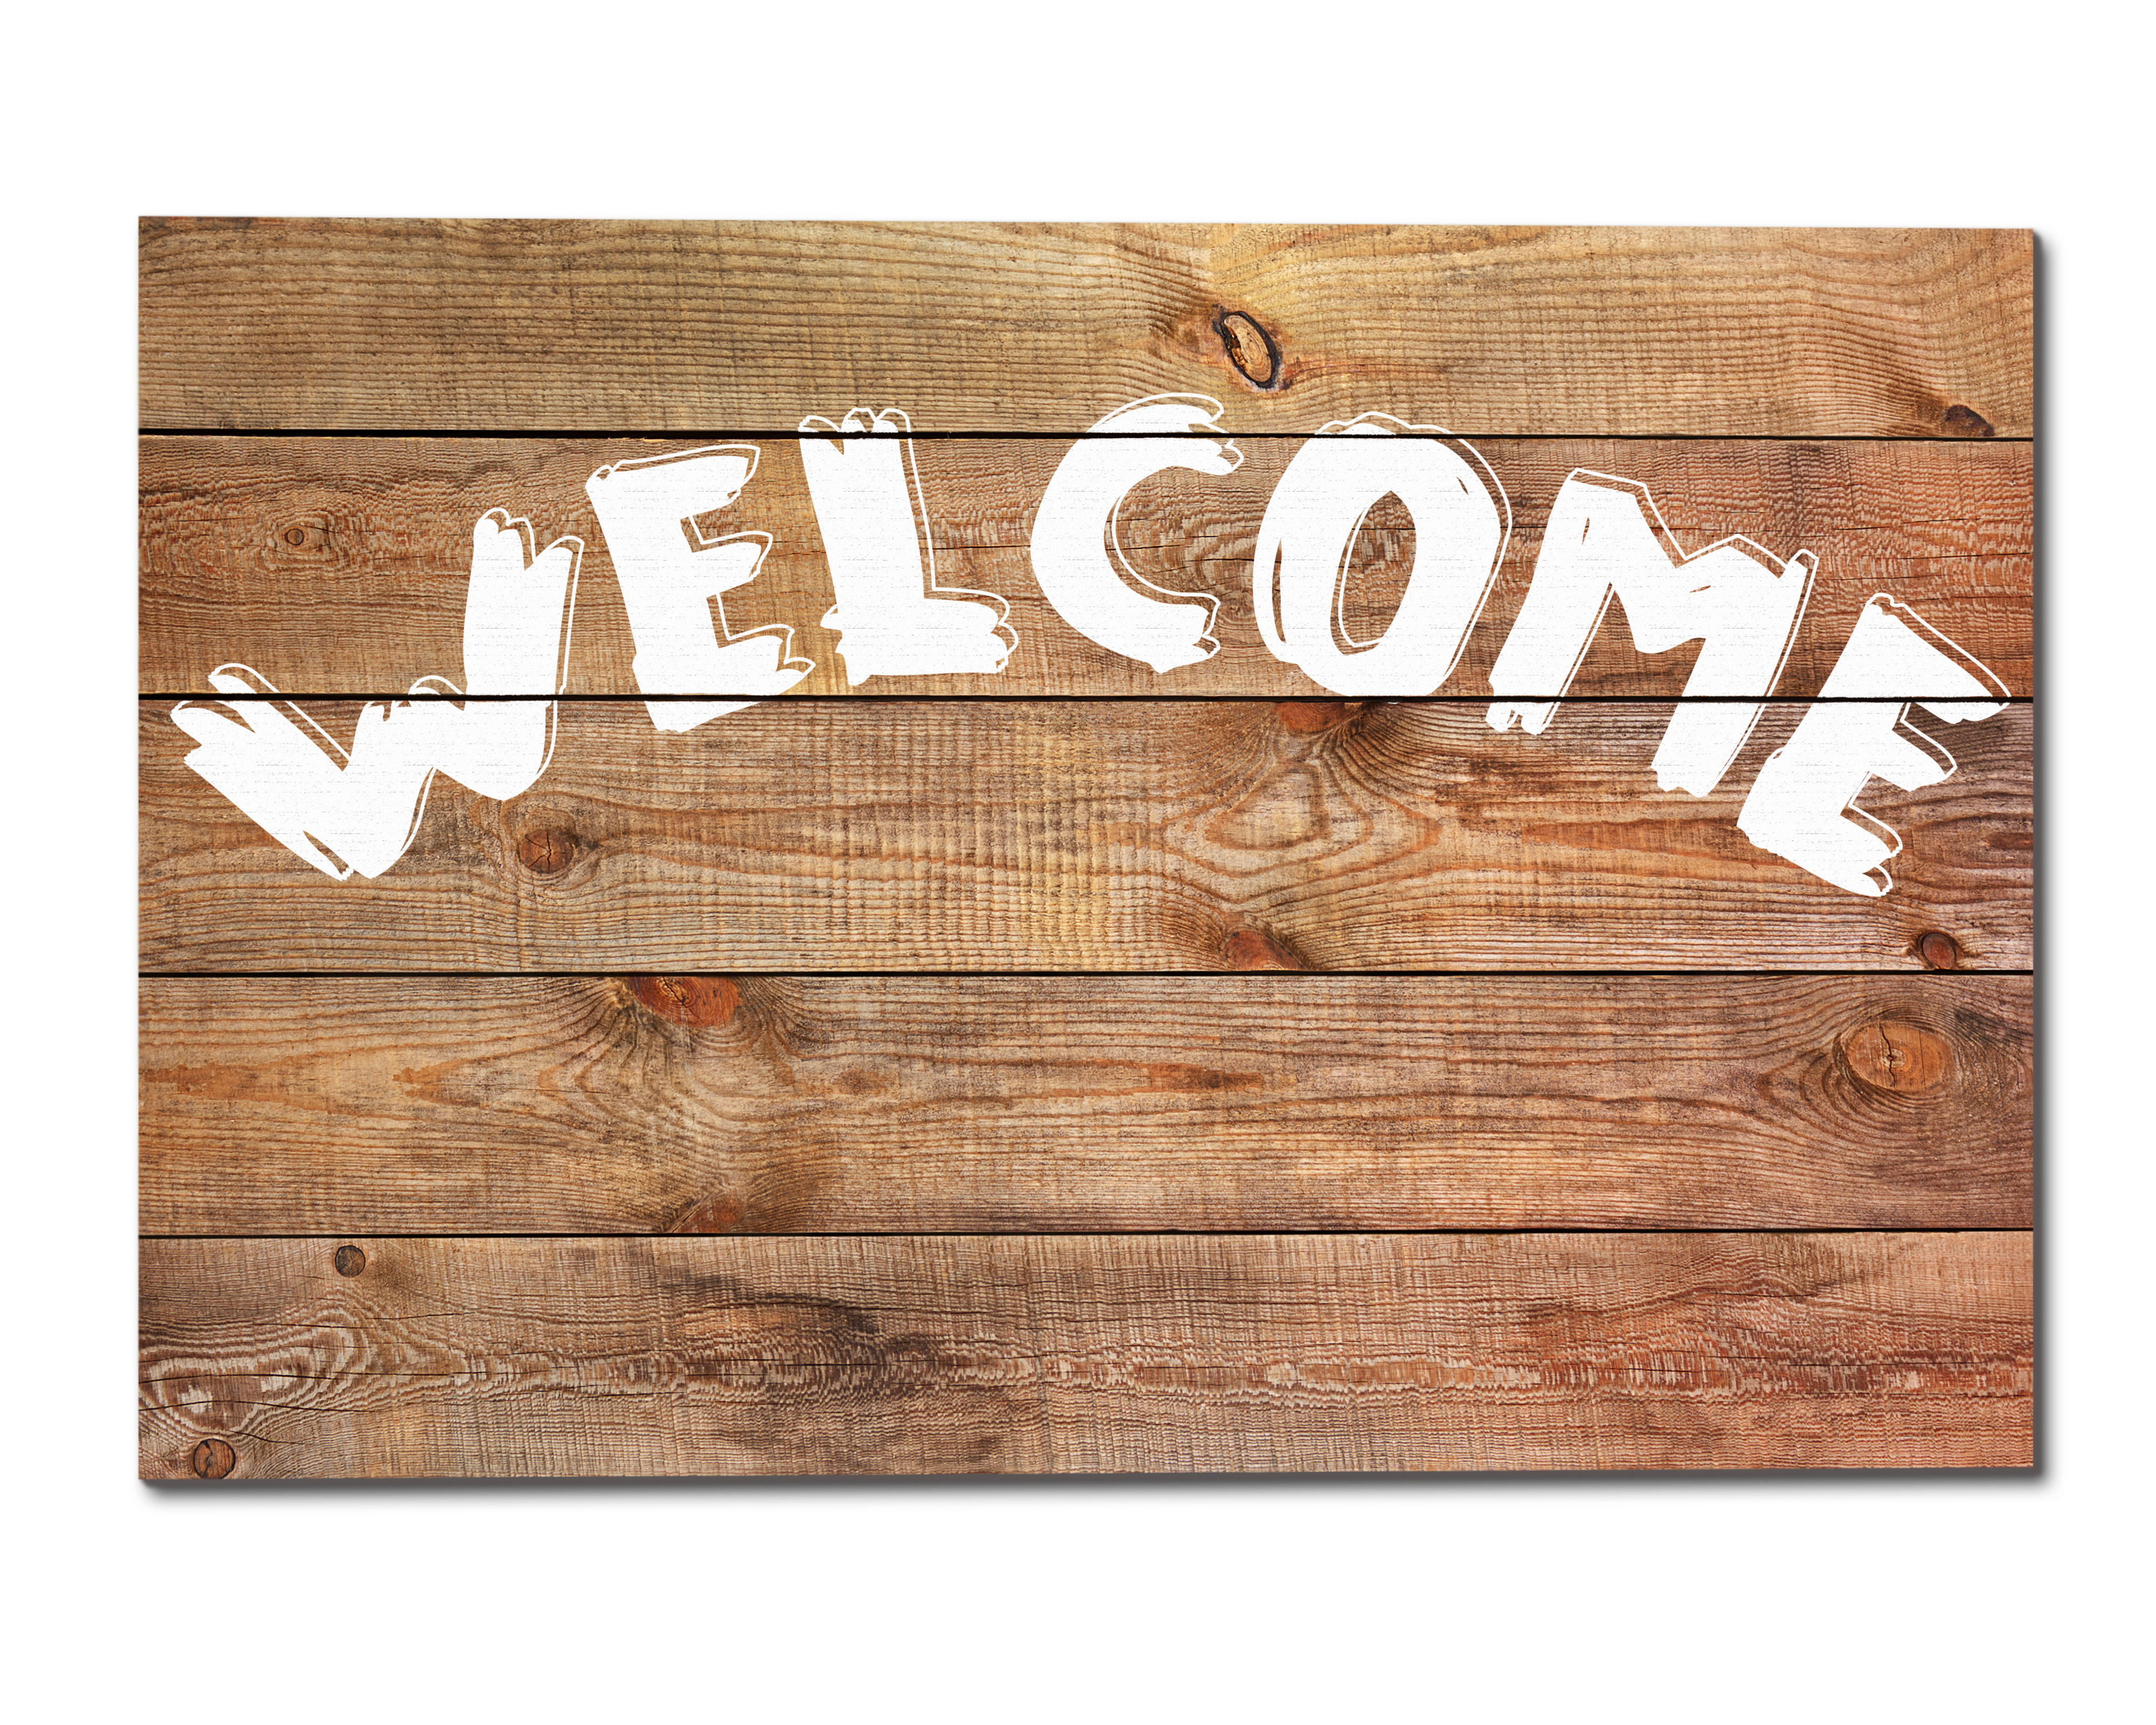 Vintage "welcome" wooden sign isolated on white background.